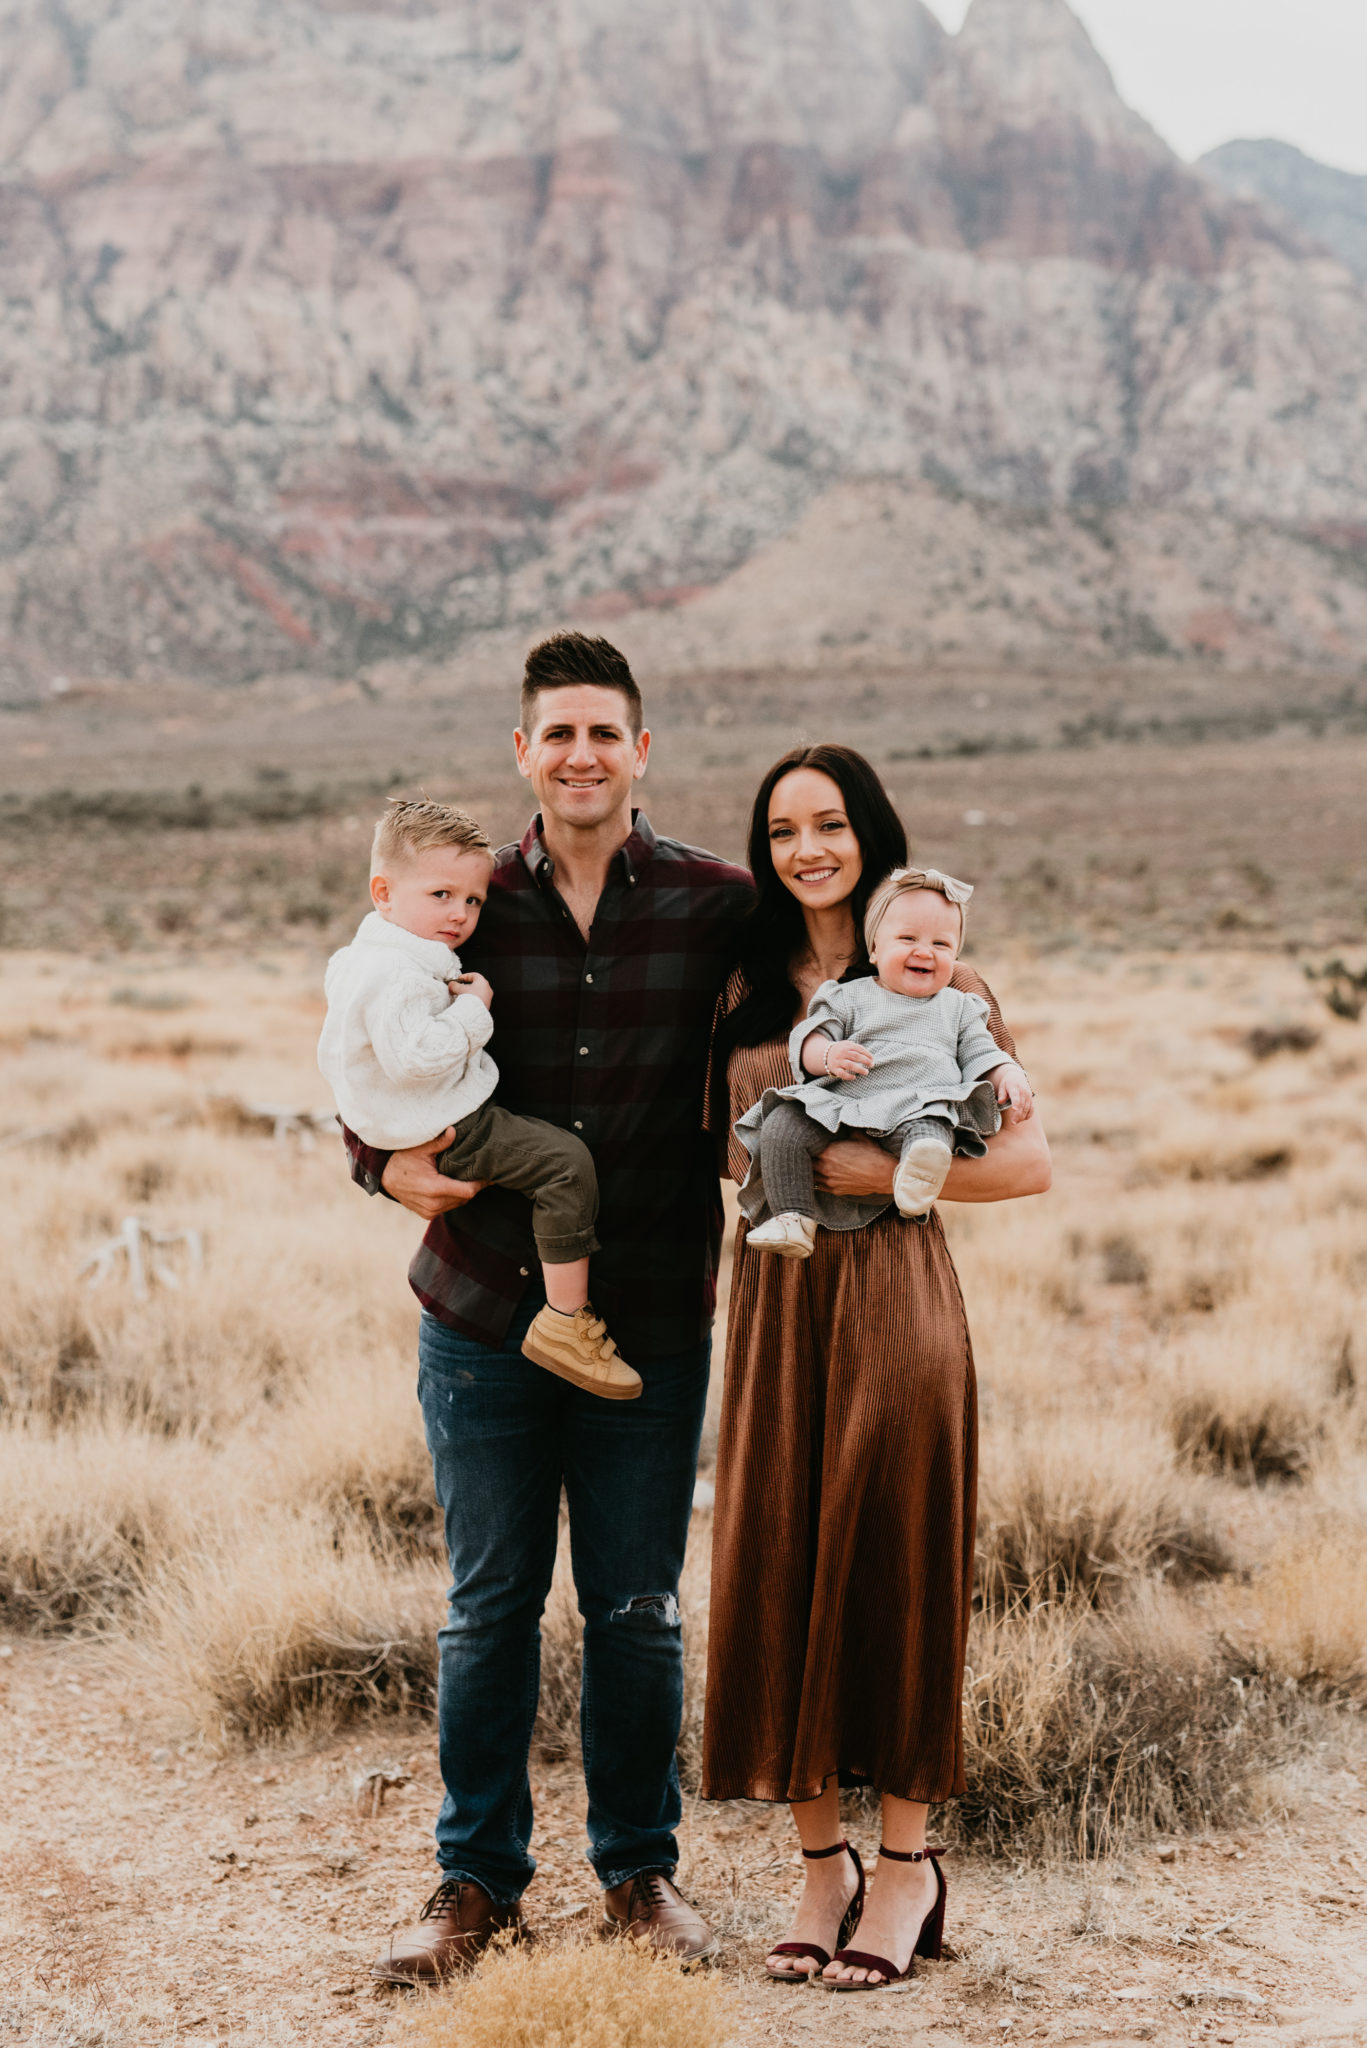 Our Holiday Family Pictures featured by top Las Vegas lifestyle blog, Outfits & Outings: image of a cute family posing in the Nevada desert